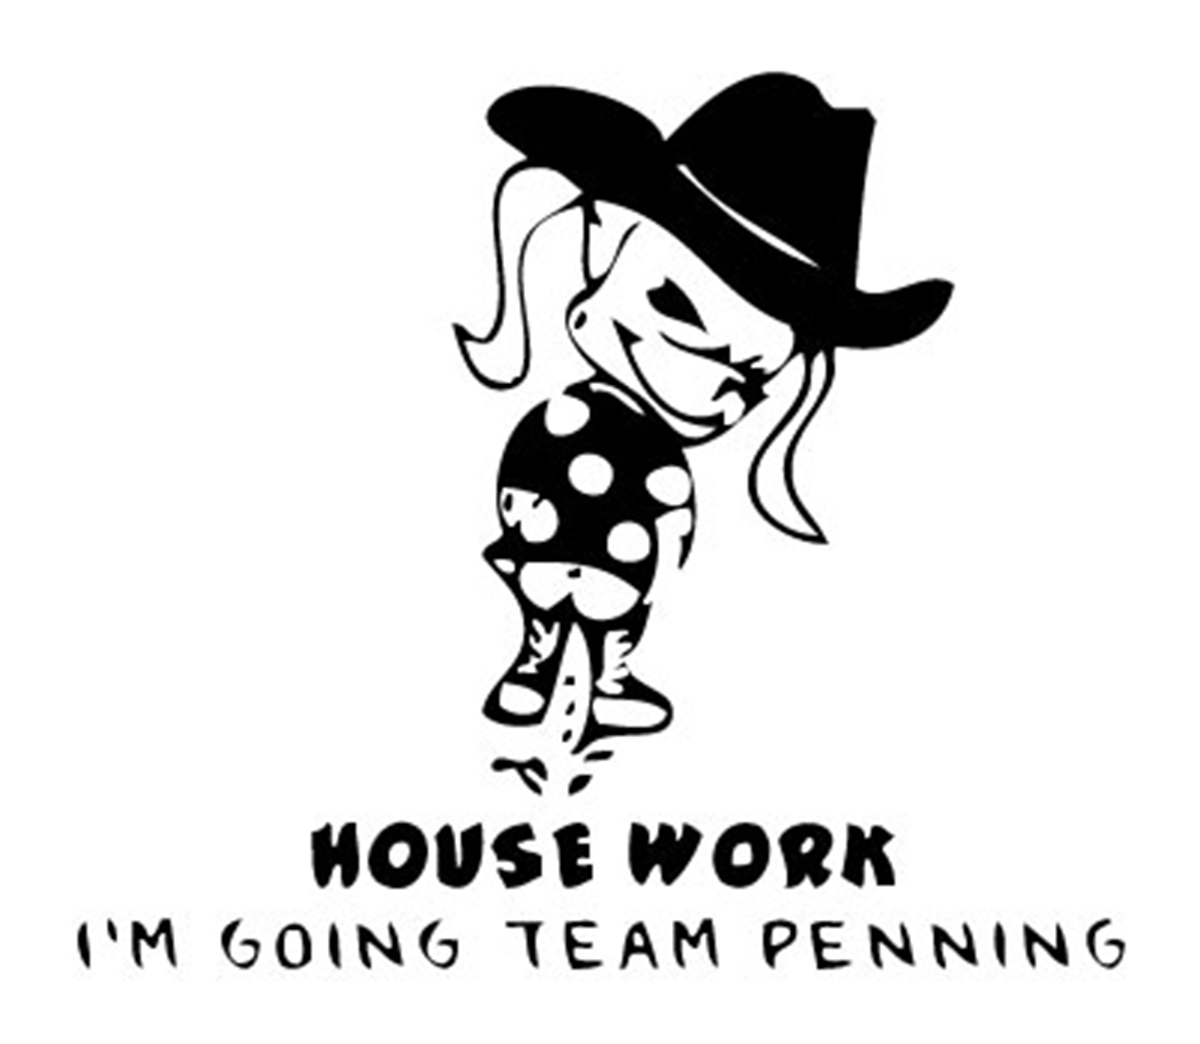 Cowgirl Pee On House Work Going Penning Sticker